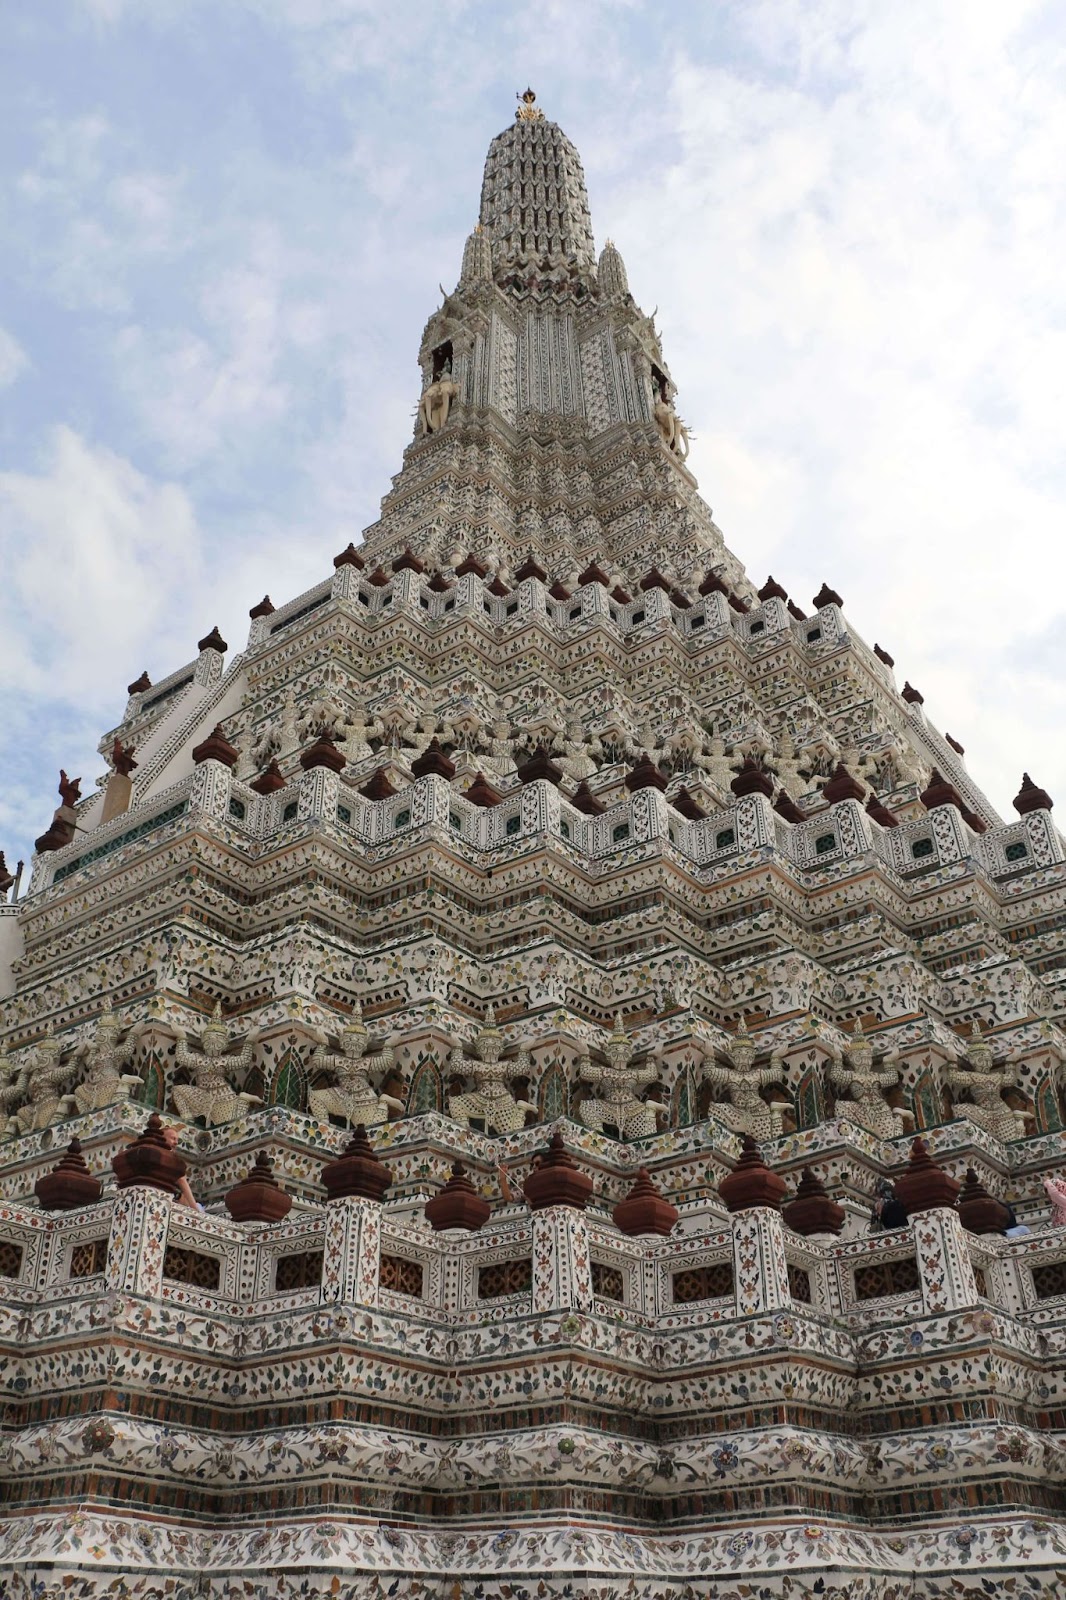 24 hours in Bangkok. This is Wat Arun or the Temple of Dawn which is Bangkok's most iconic landmark.